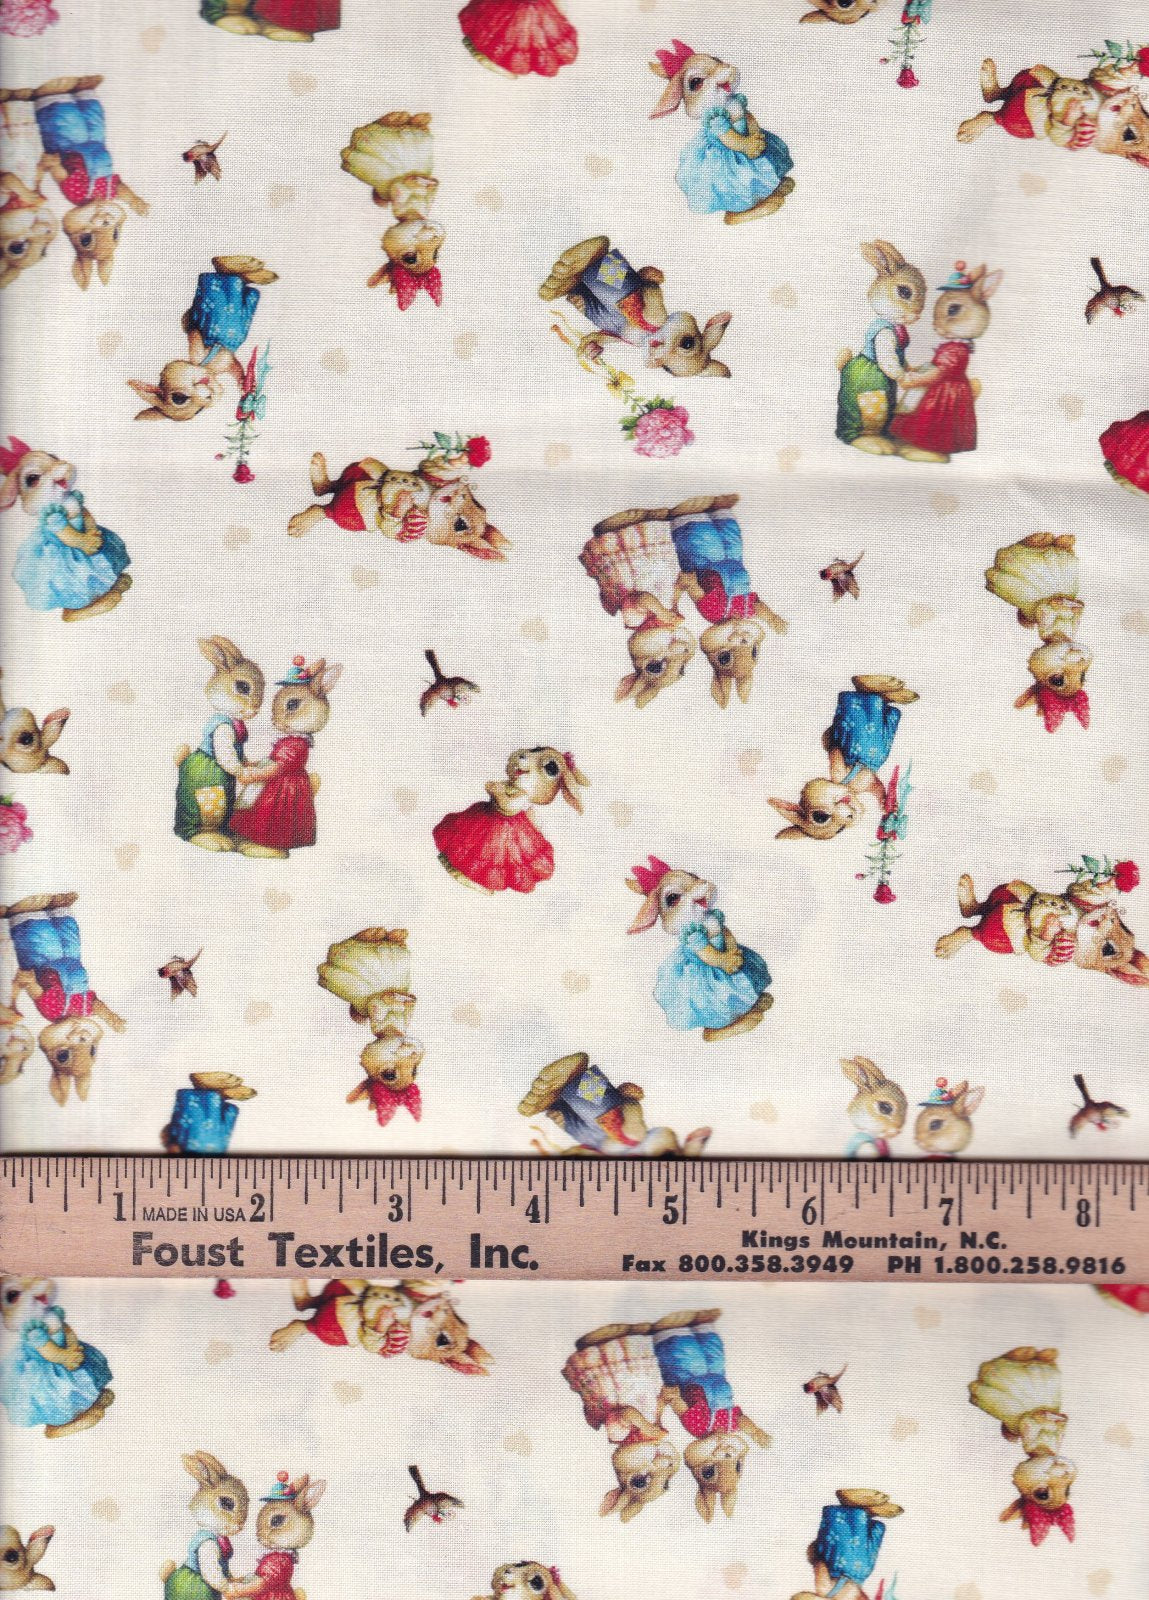 44 x 36 Tossed Bunnies Cream I Love You Easter by Elizabeths Studio 100% Cotton Fabric